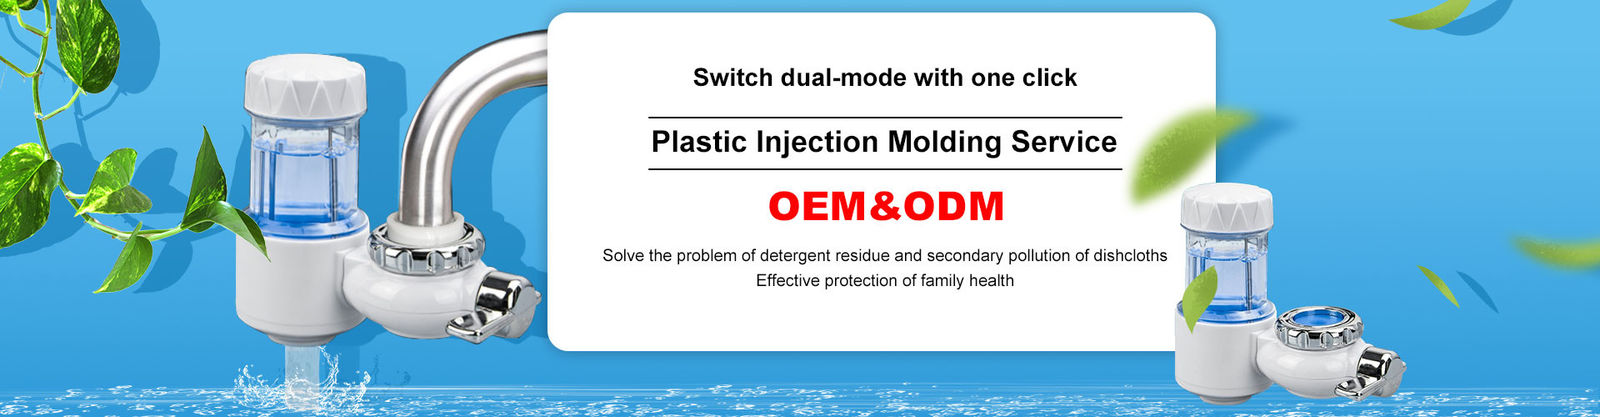 Injection Molding Services